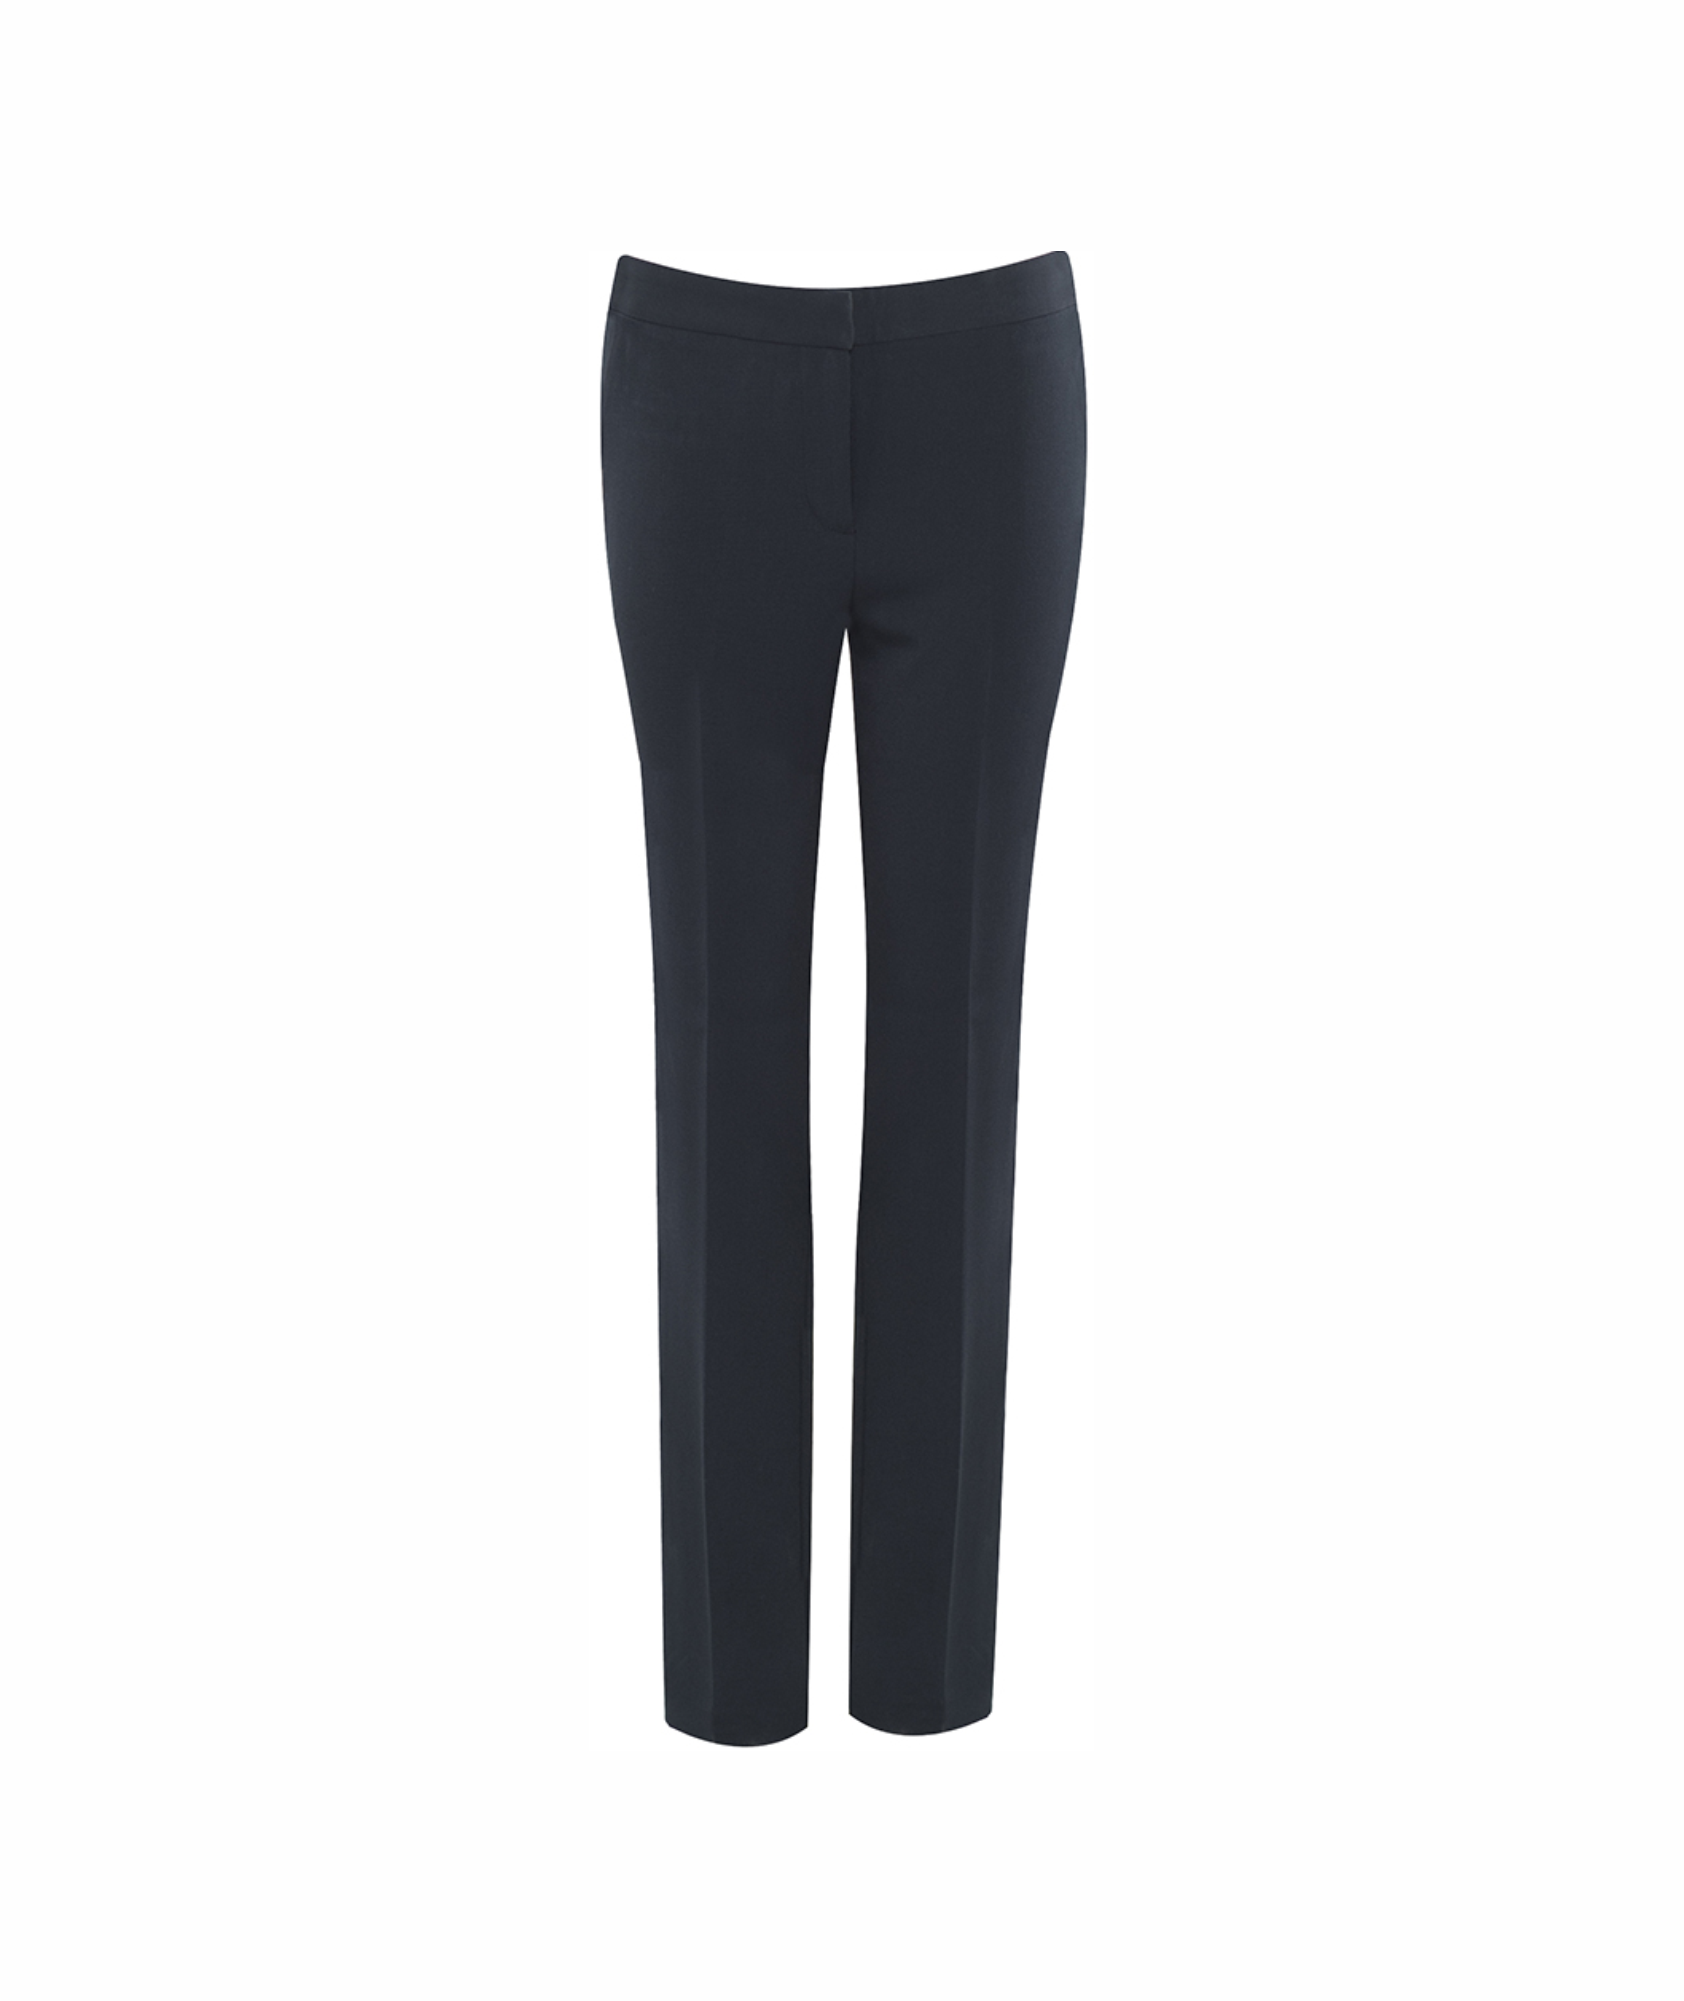 Cotton Navy Blue Ladies Formal Pant at Rs 295/piece in New Delhi | ID:  20270601173